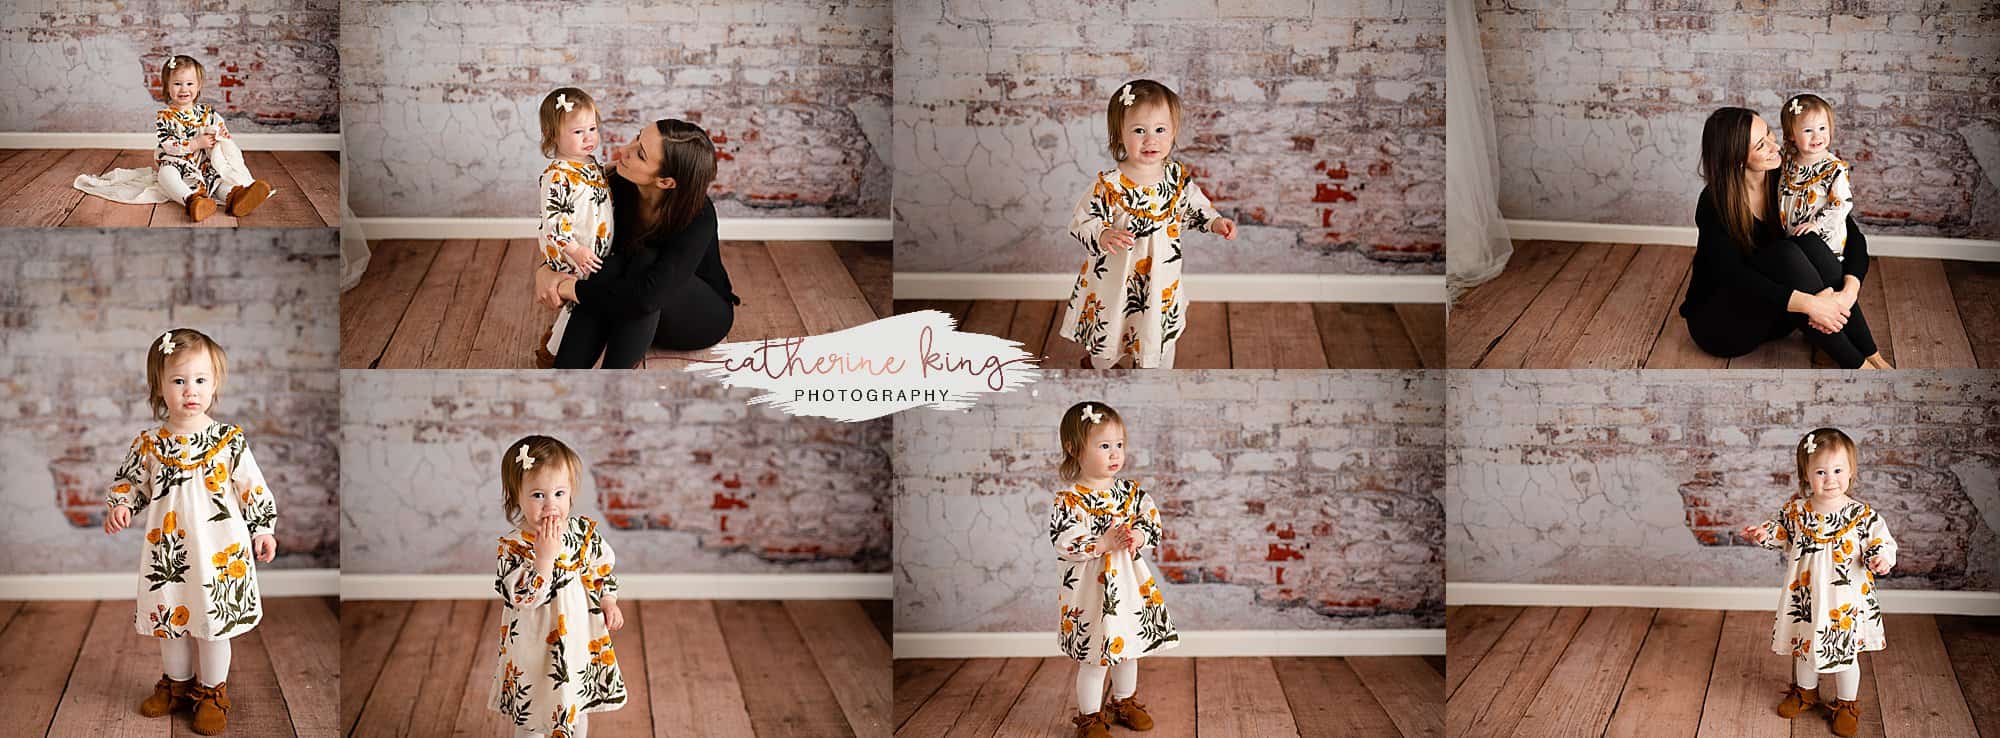 Celebrating 18 months with milestone photography